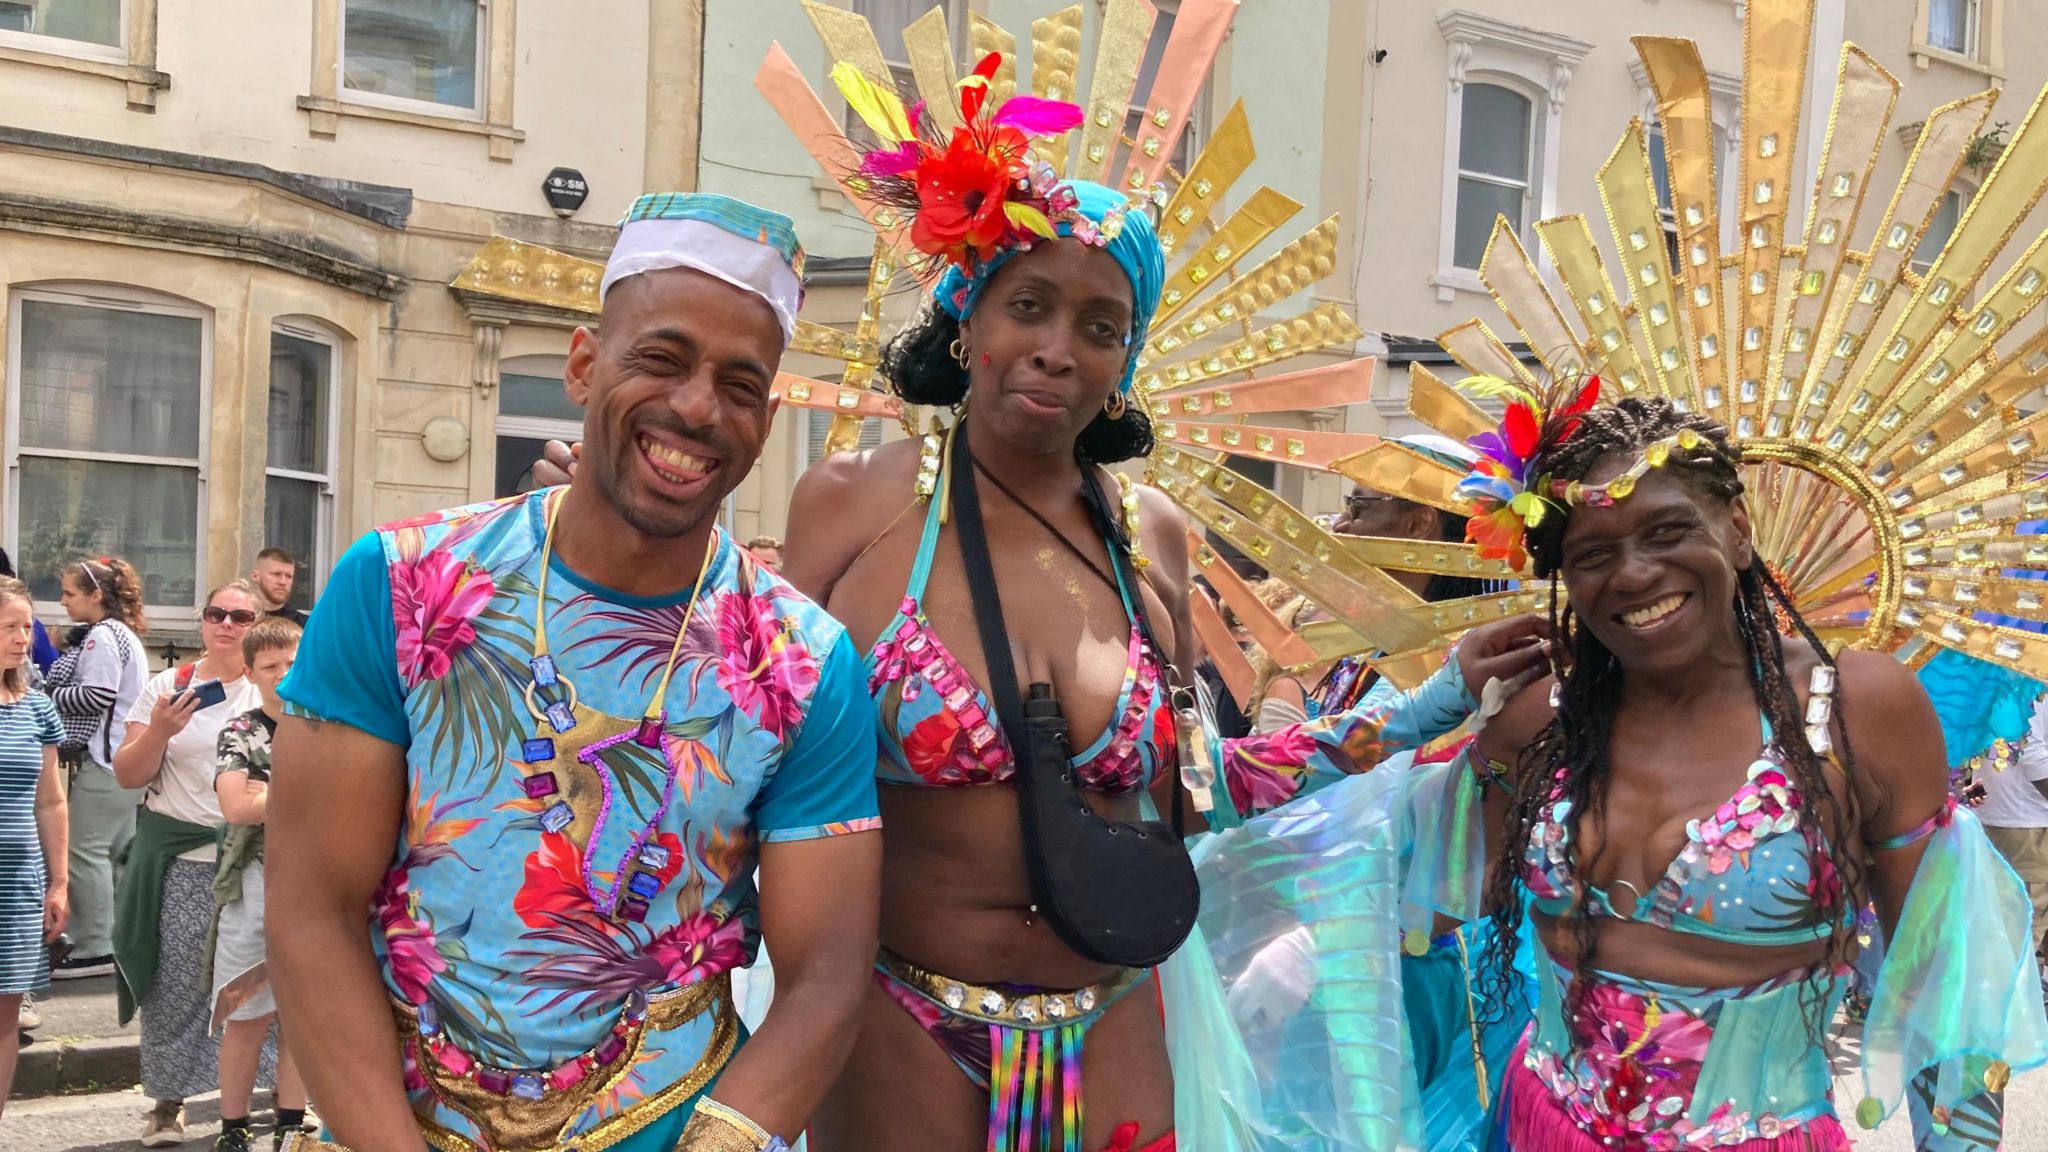 St Pauls Carnival-goers are pictured in flowery blue outfits at last year's event